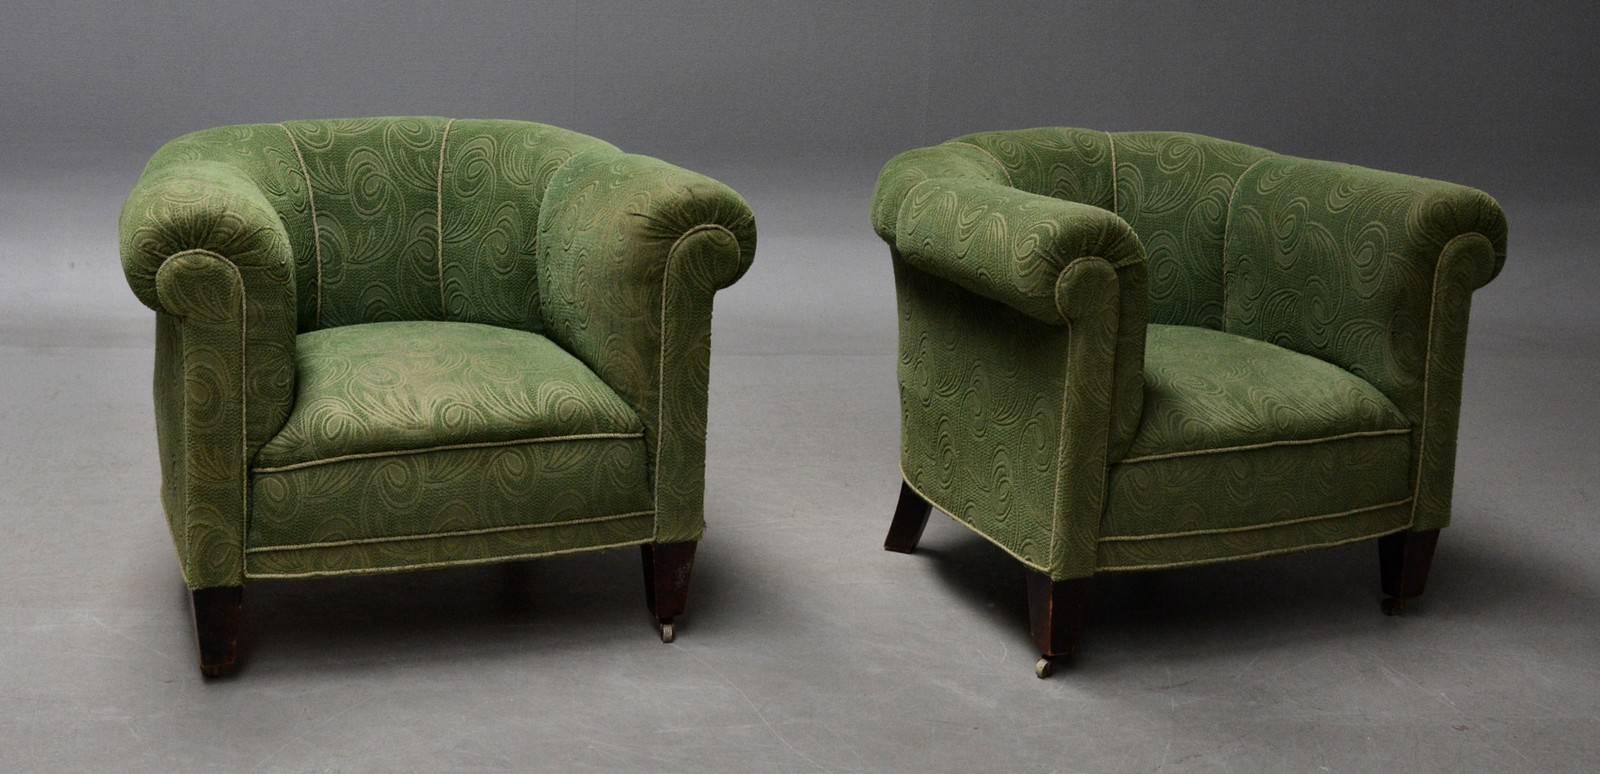 Danish 1950s Chesterfield style pair of club chairs very similar to some of famed Otto Schulz' designs from the 1940s. Sturdy and solid raised on legs of stained beech with wheels on the front legs. Fabric is clean but shows signs of moderate wear